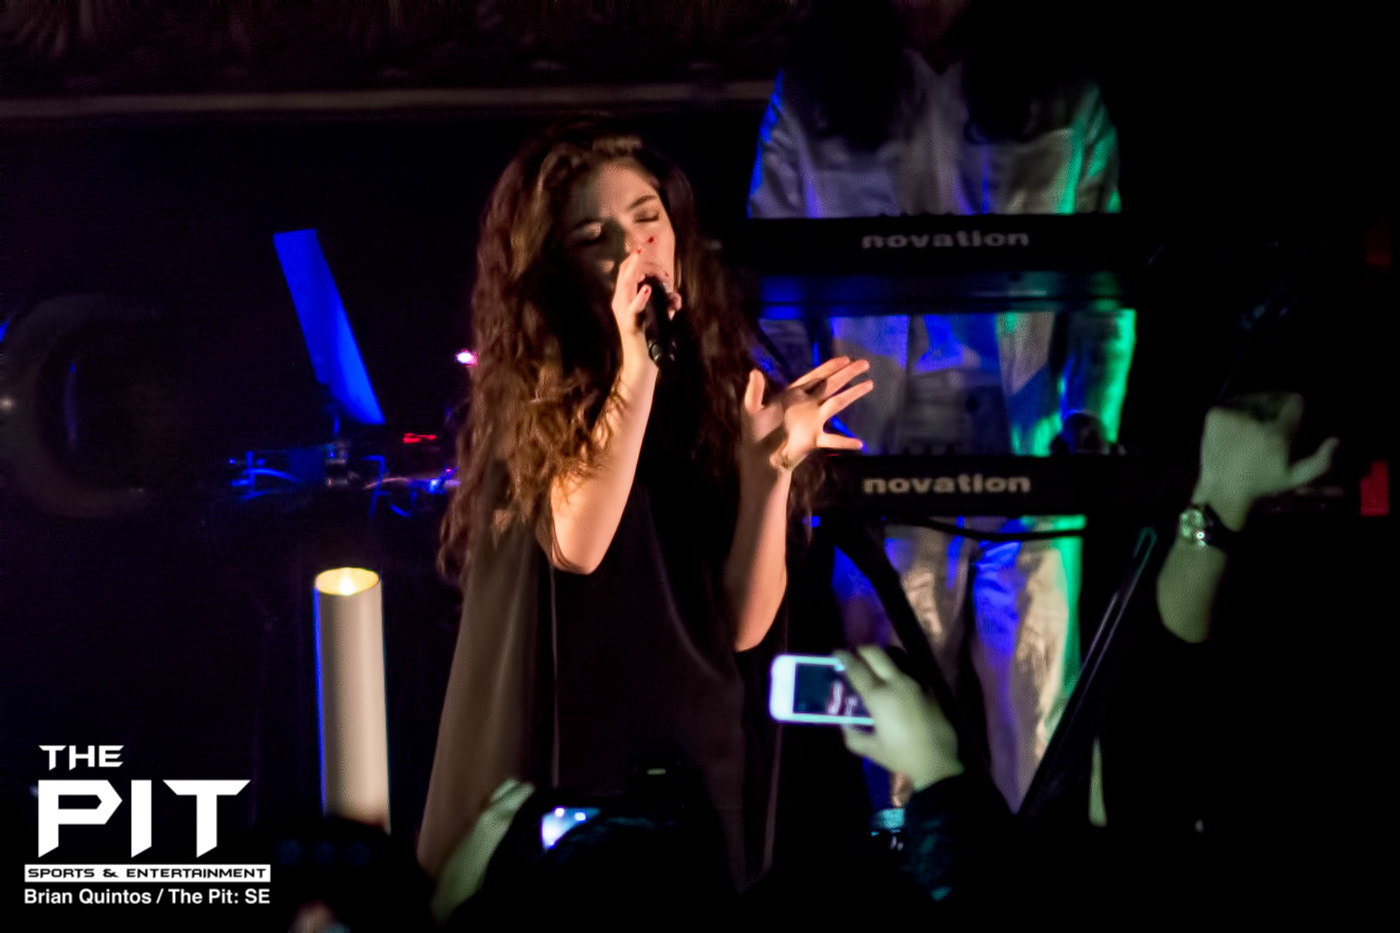 Lorde performing at The Fillmore Detroit in Detroit, Michigan, March 16, 2014.